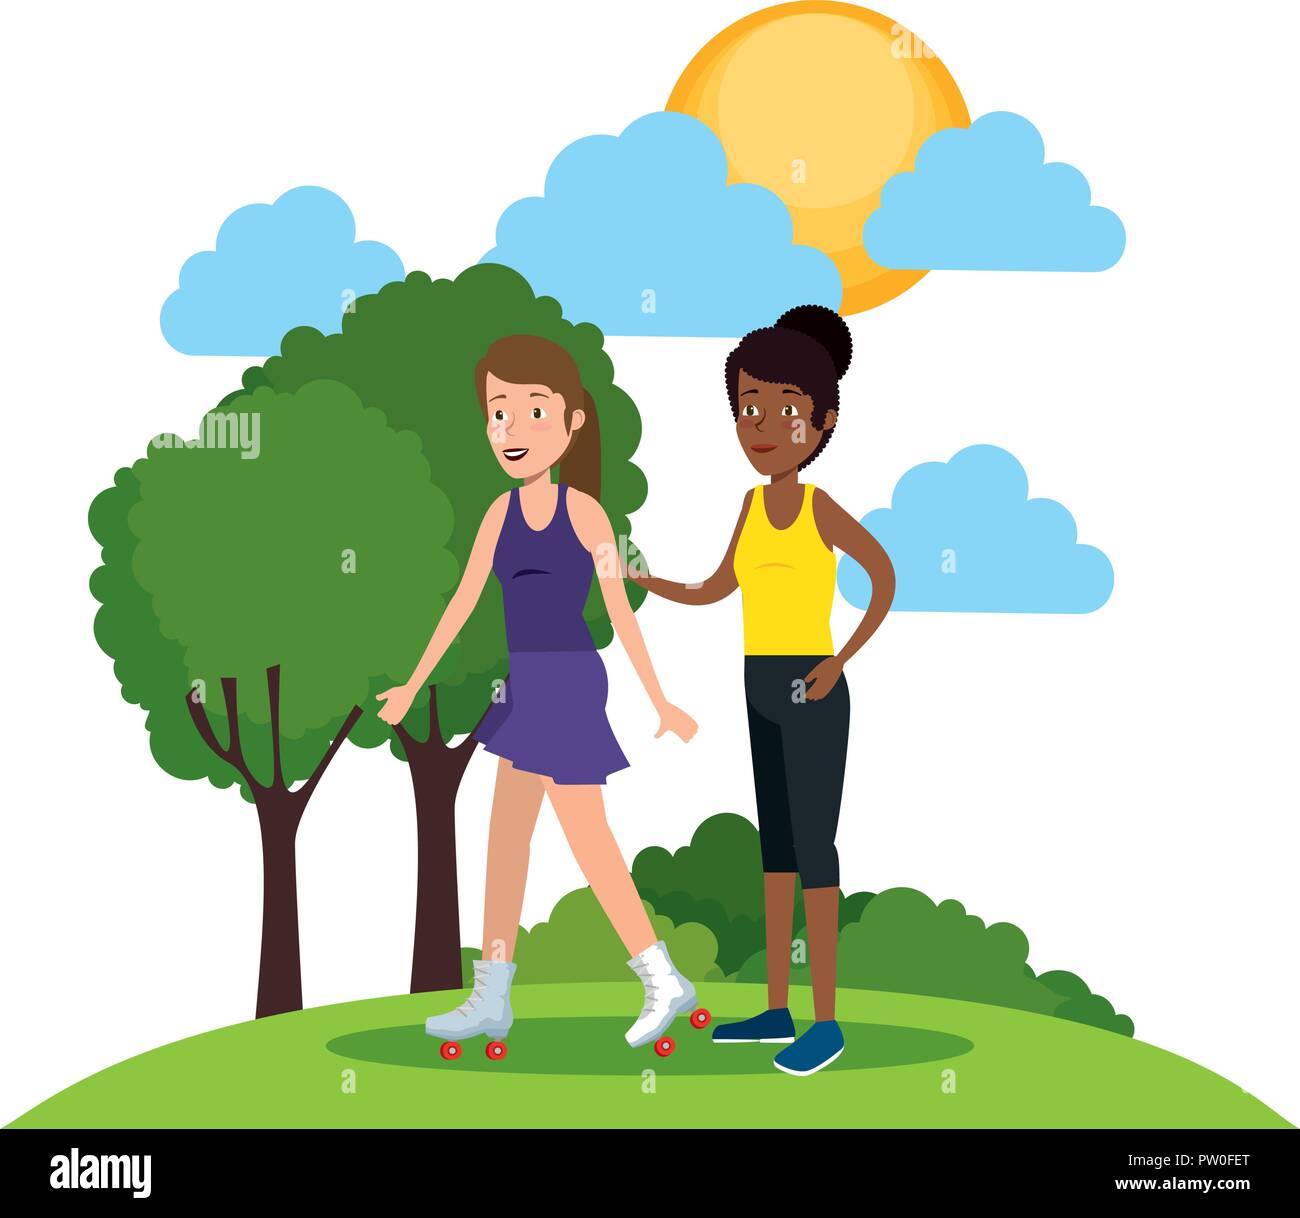 couple girls athletes practicing sports Stock Vector